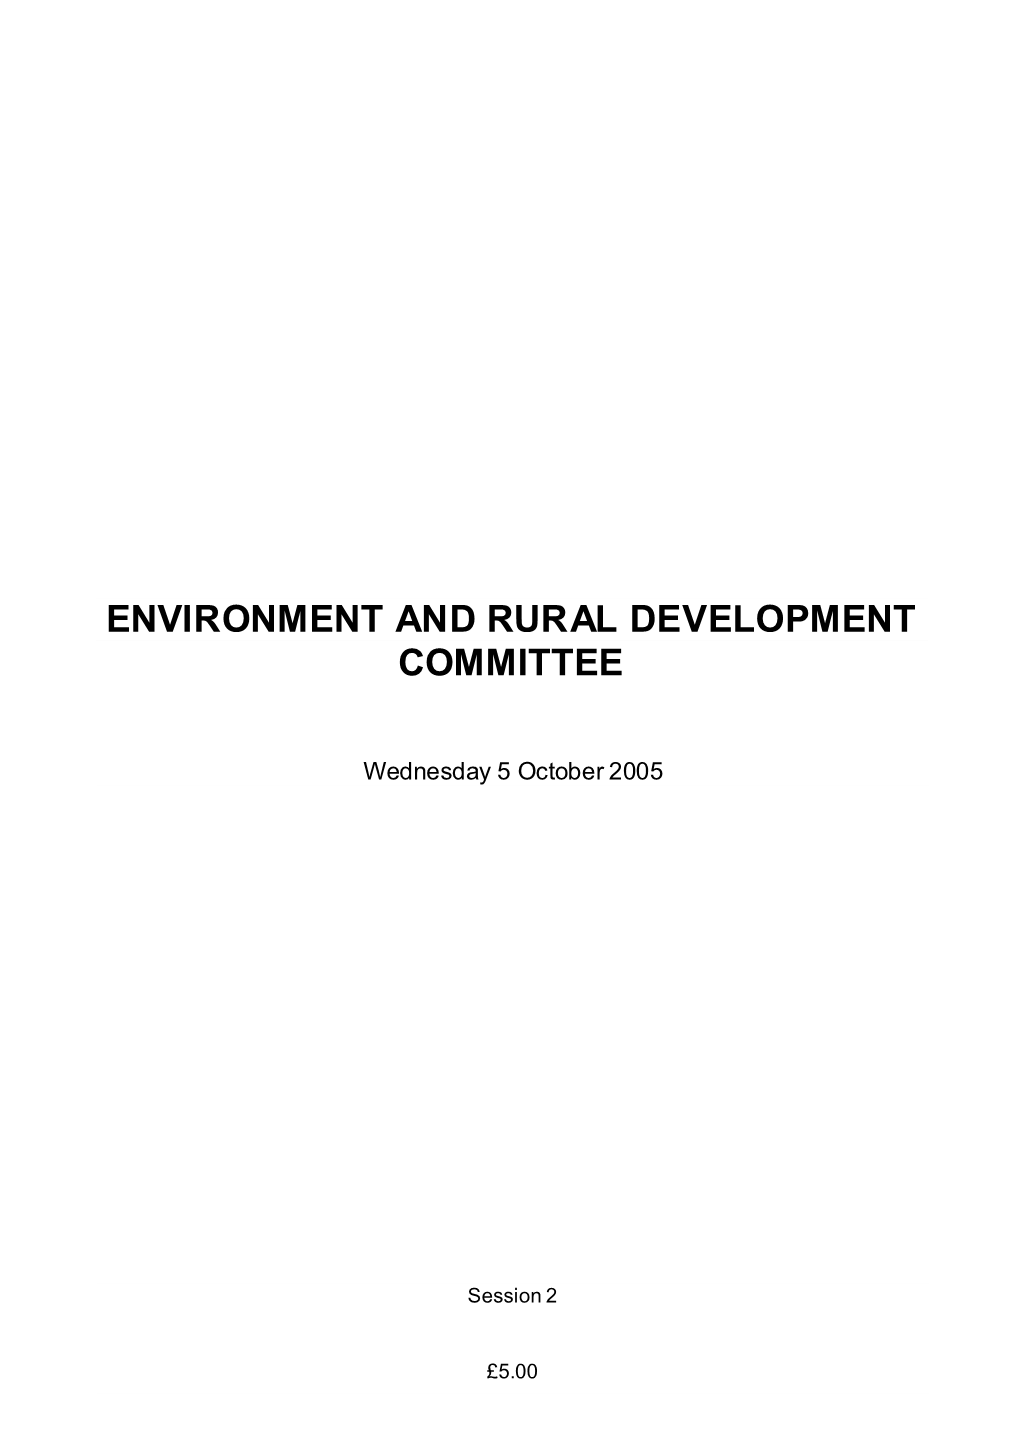 Environment and Rural Development Committee